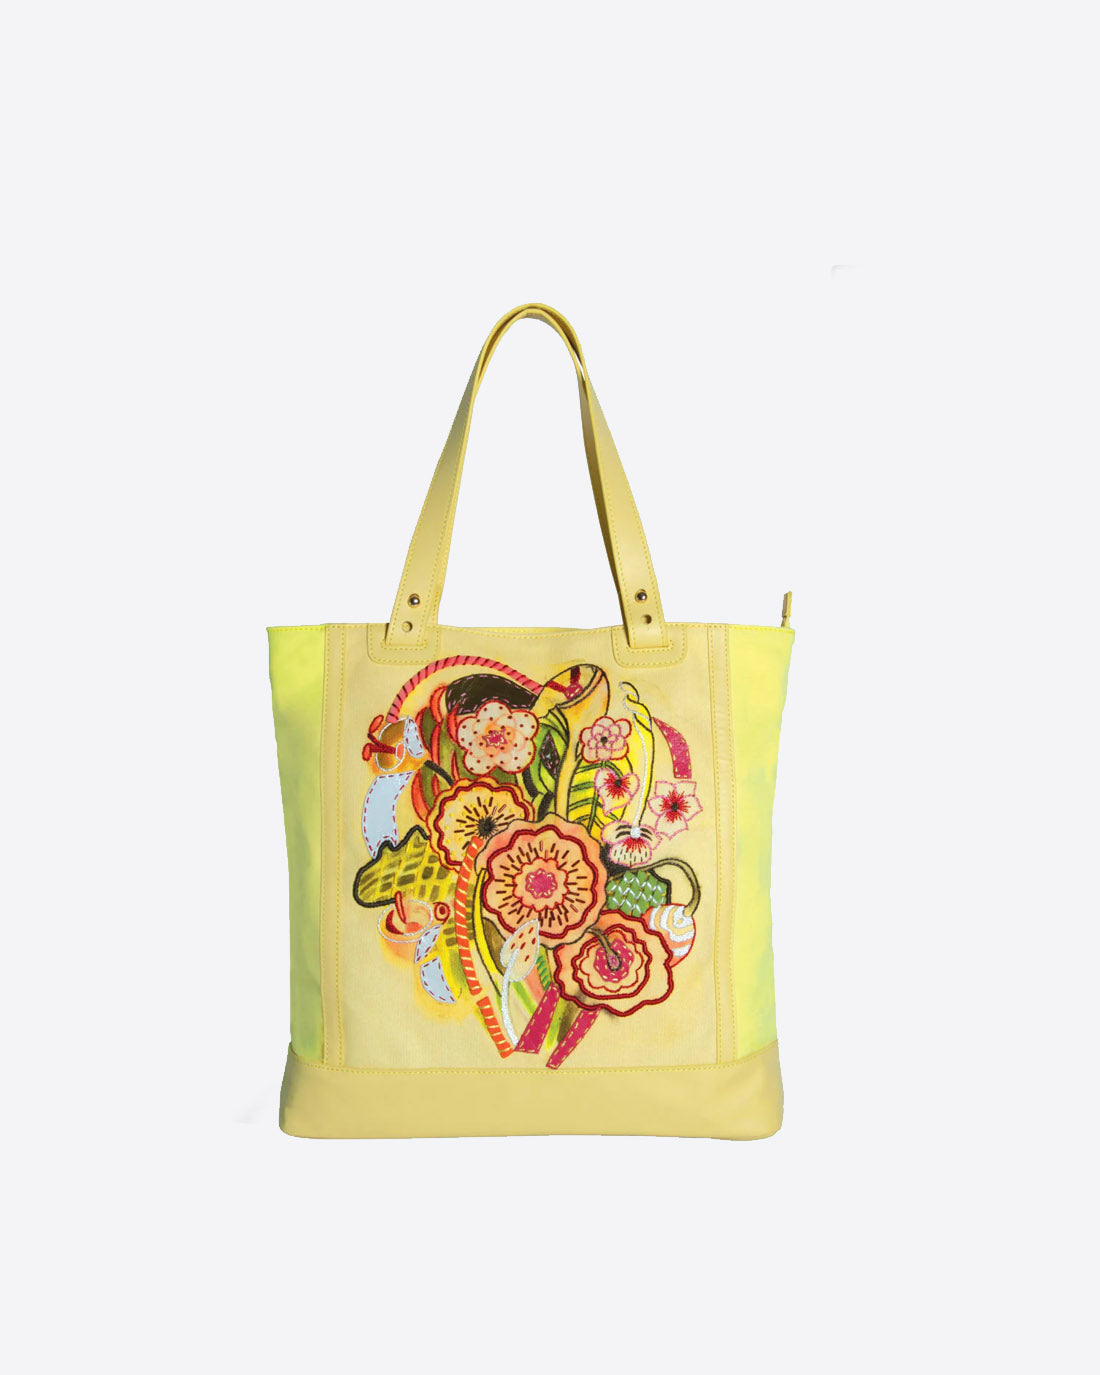 Flower Illustration Canvas Tote Bag (Yellow / Blue / Olive